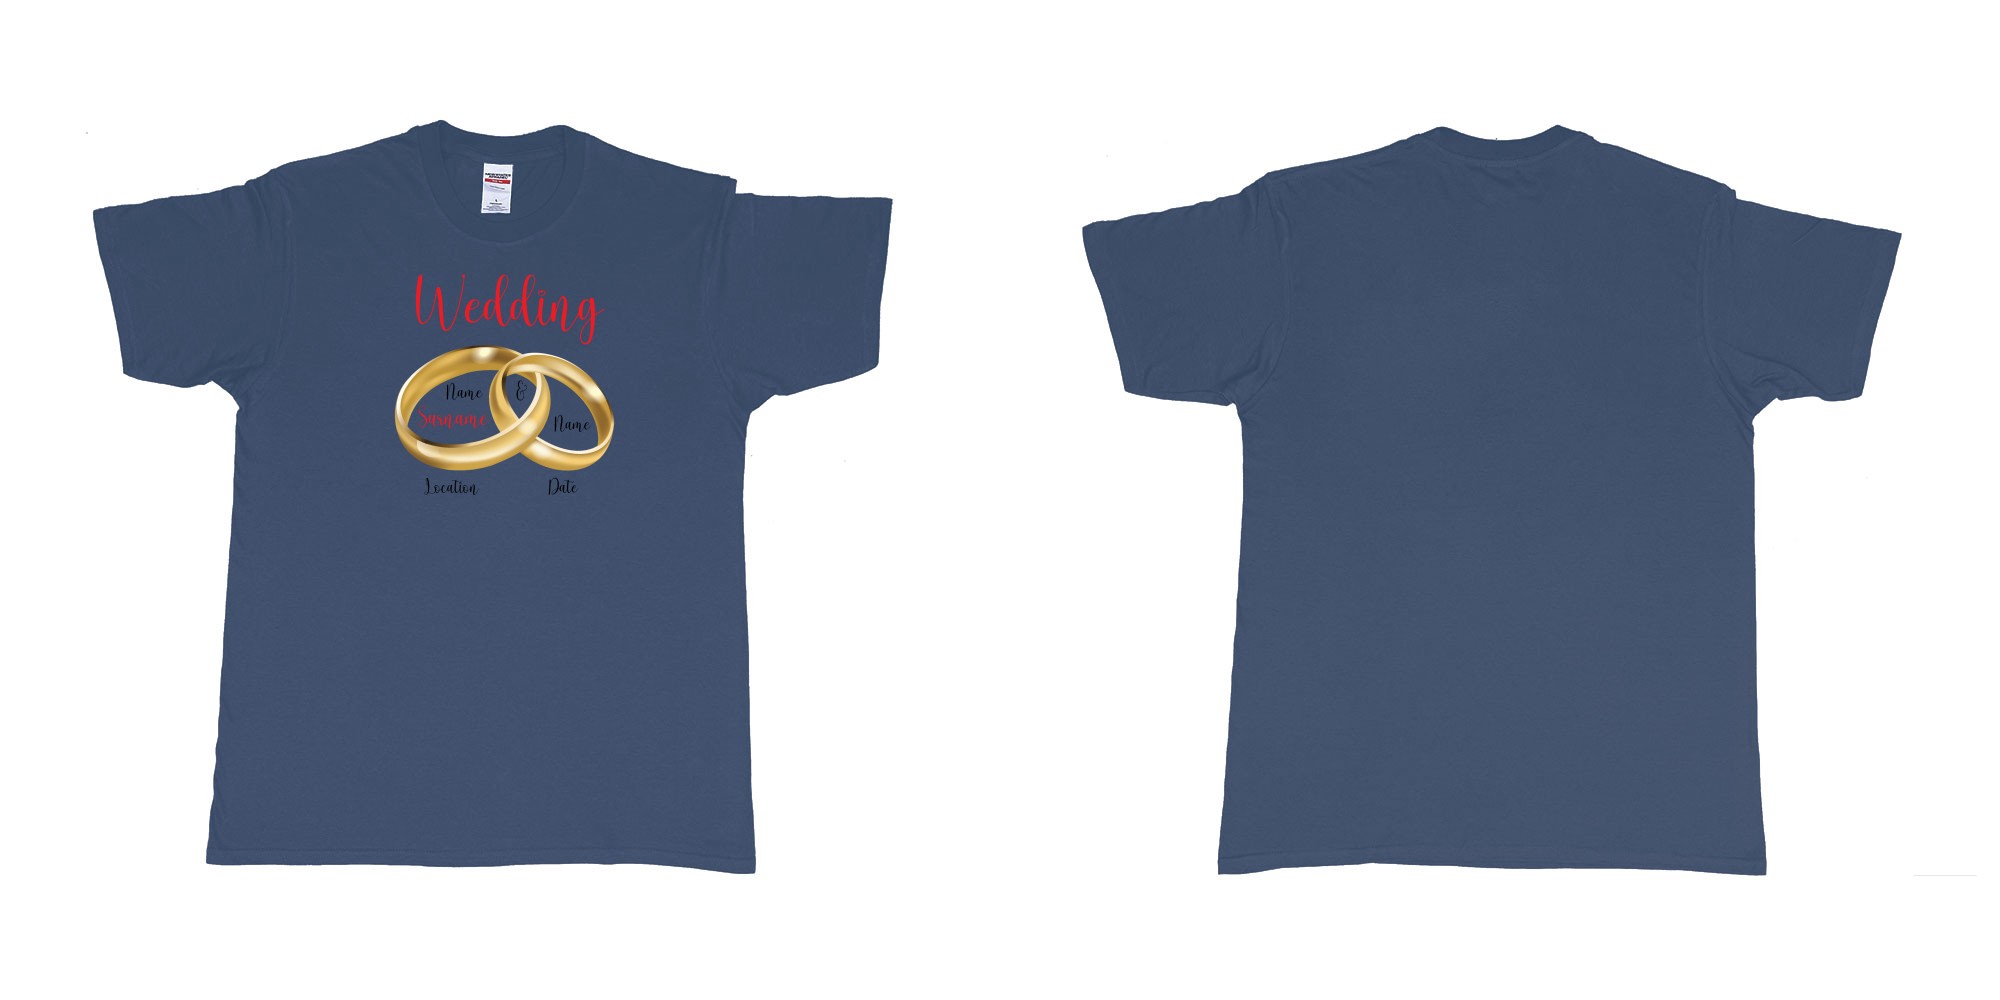 Custom tshirt design wedding rings in fabric color navy choice your own text made in Bali by The Pirate Way